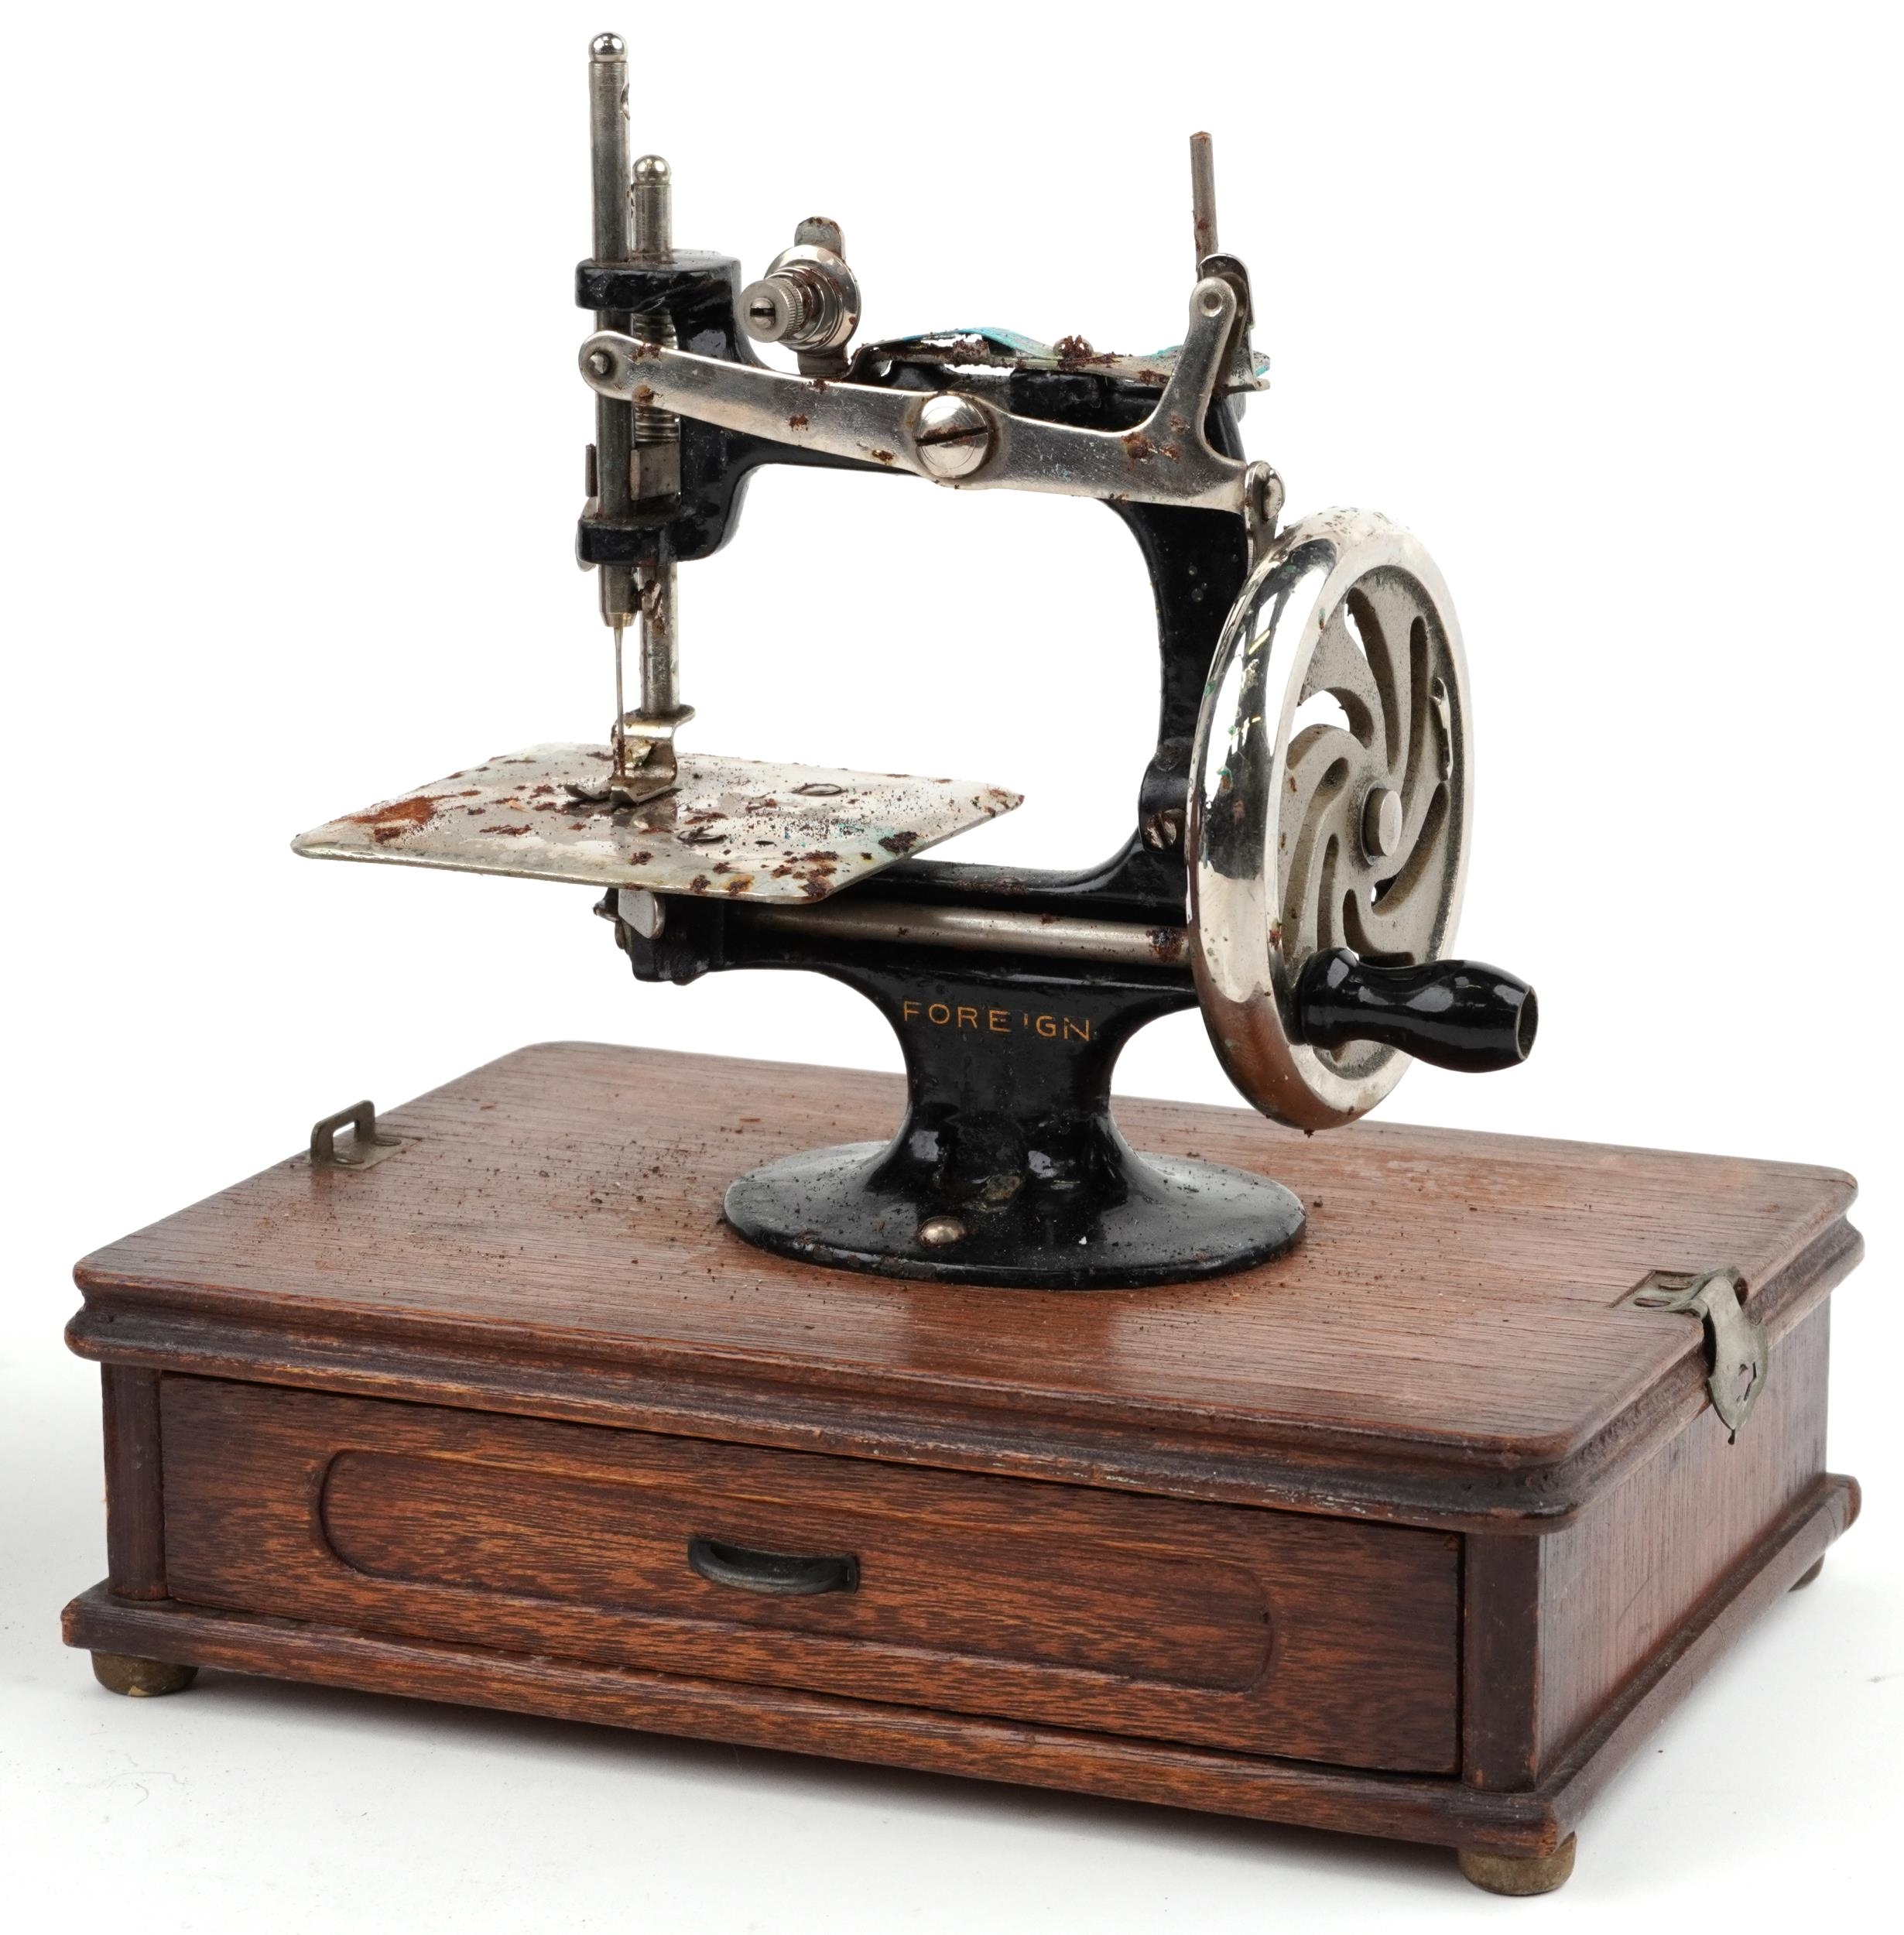 Early 20th century continental cast iron child's sewing machine with dome top case - Image 2 of 4